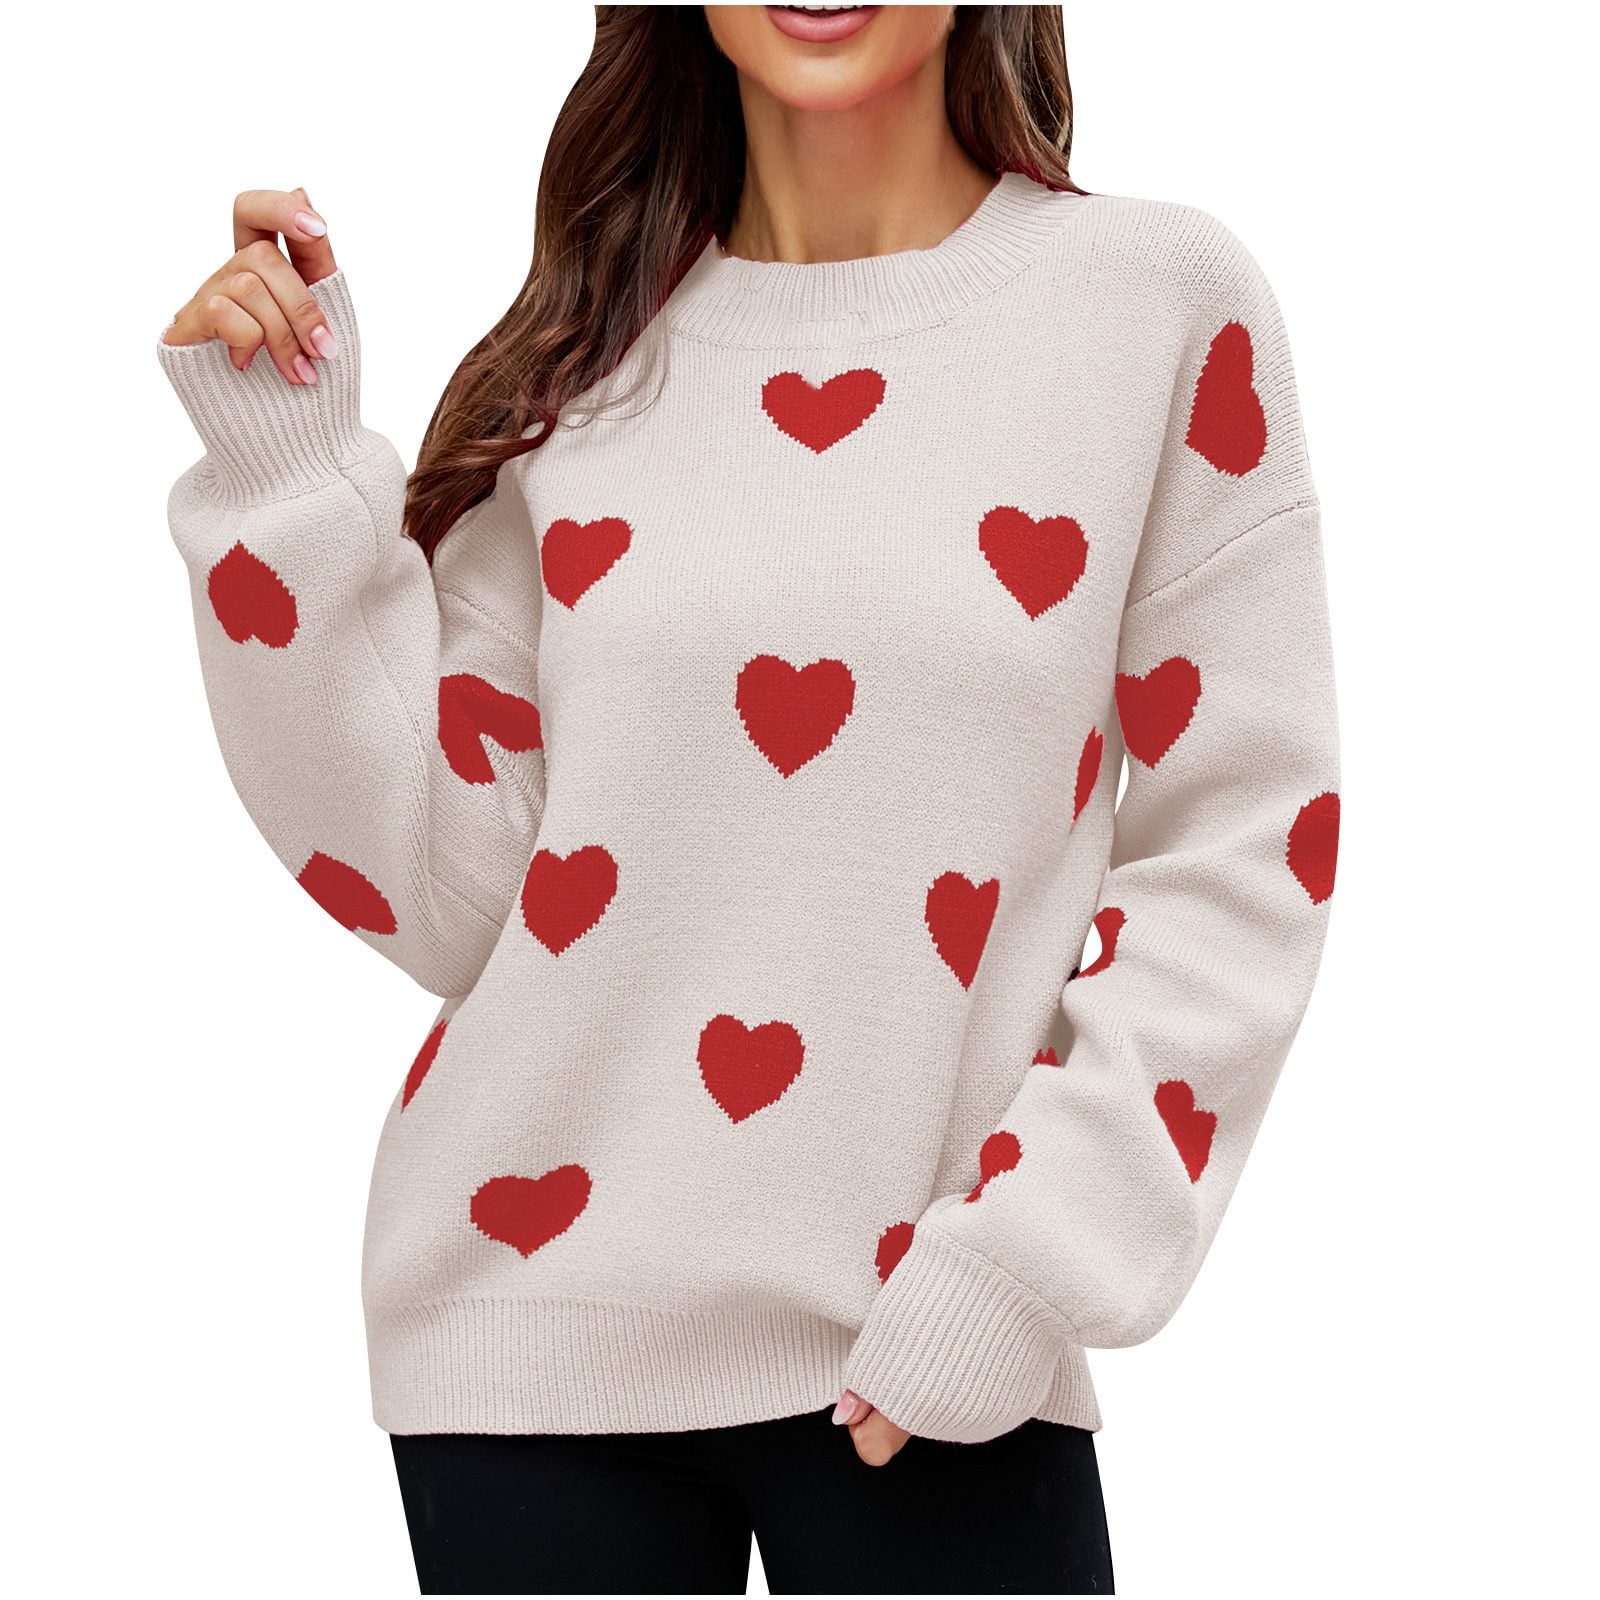 JGGSPWM Cute Heart Print Sweaters for Womens Valentines Day Tops Casual ...